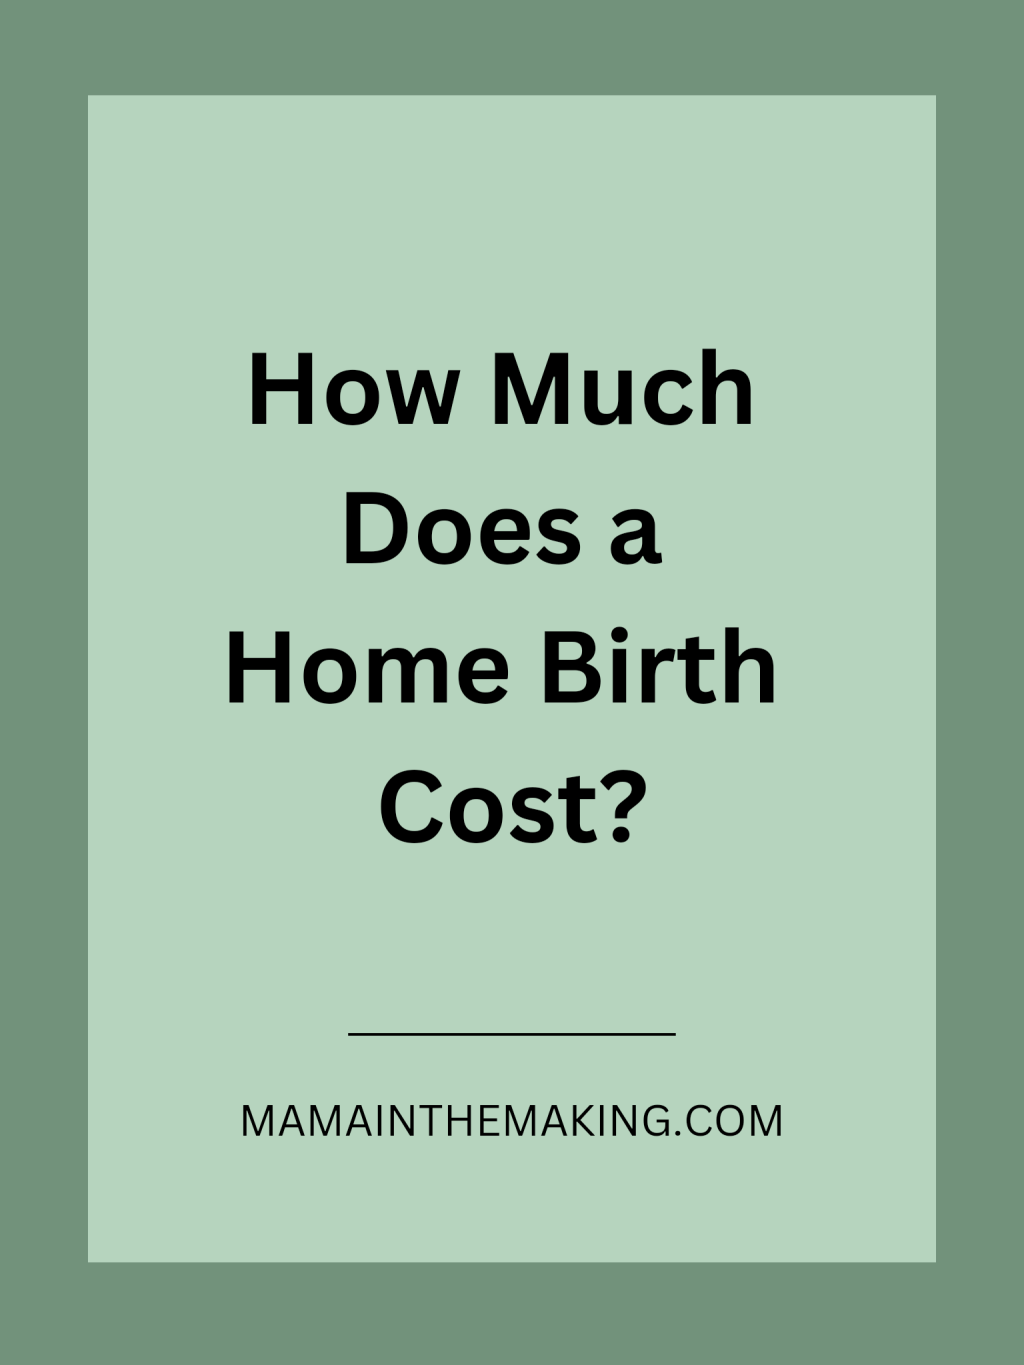 How Much Does a Home Birth Cost?